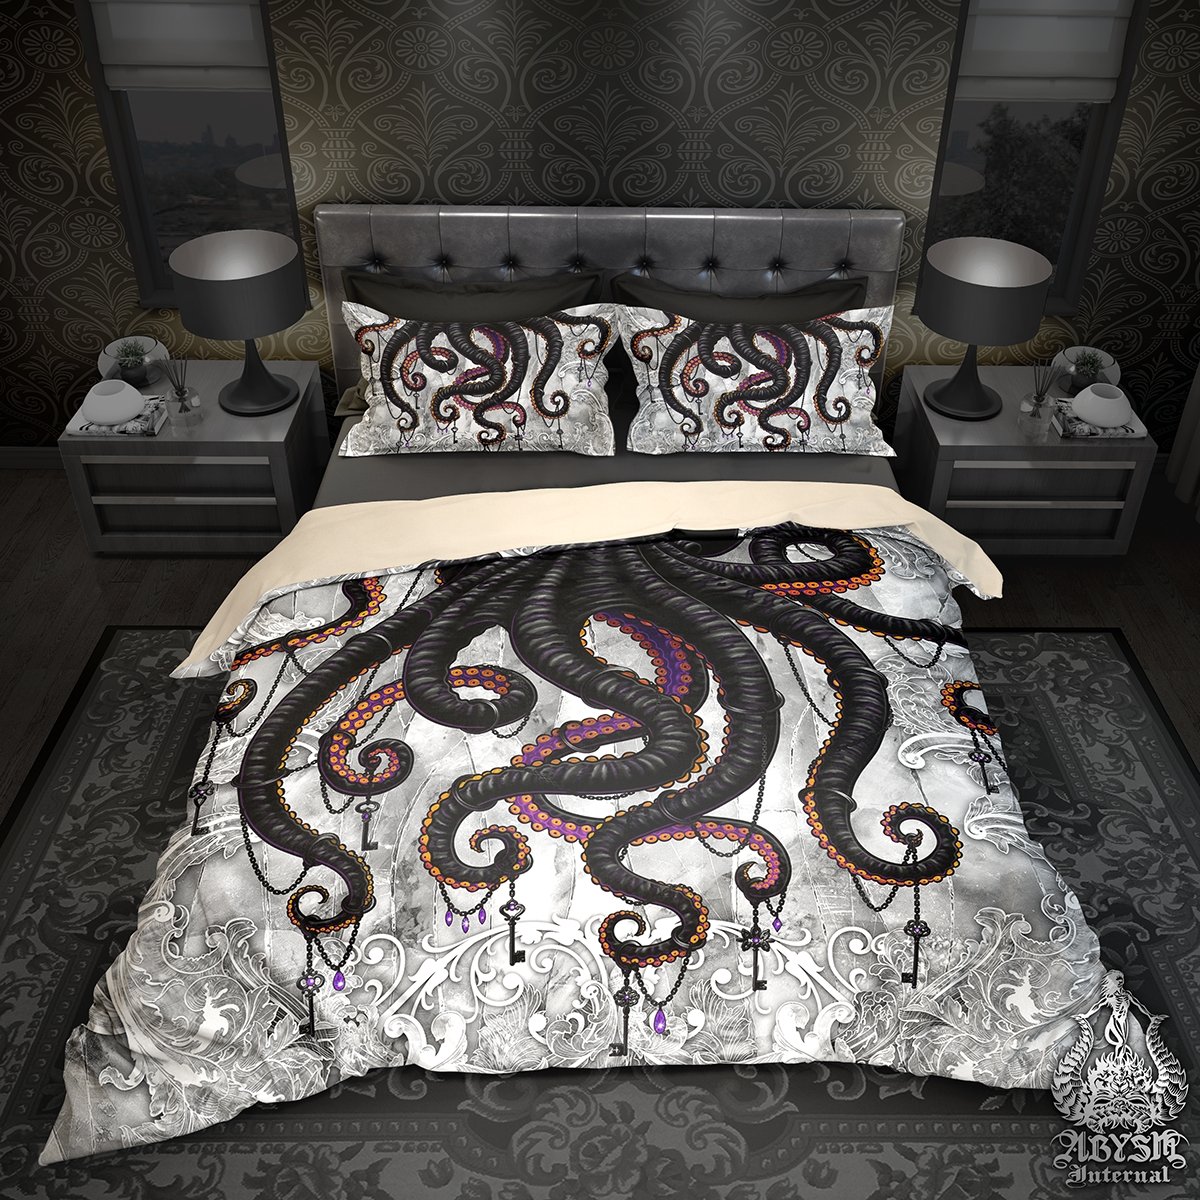 Octopus Bedding Set, Comforter and Duvet, Gothic Bed Cover, Coastal Bedroom Decor, King, Queen and Twin Size - Black and White Goth - Abysm Internal